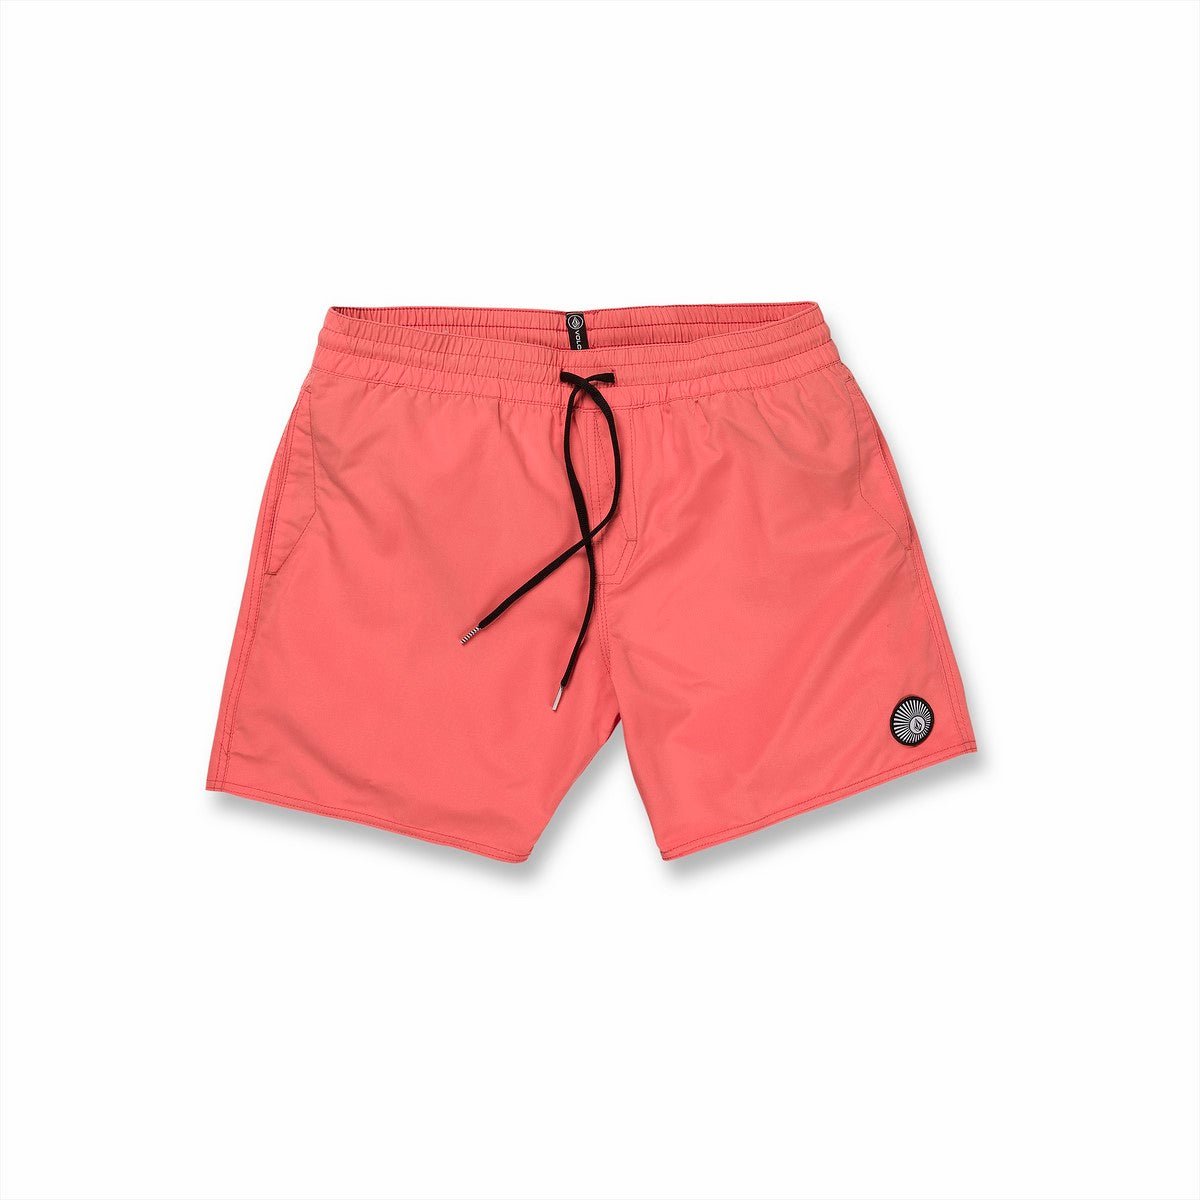 LIDO SOLID TRUNK 16 - LIVING CORAL